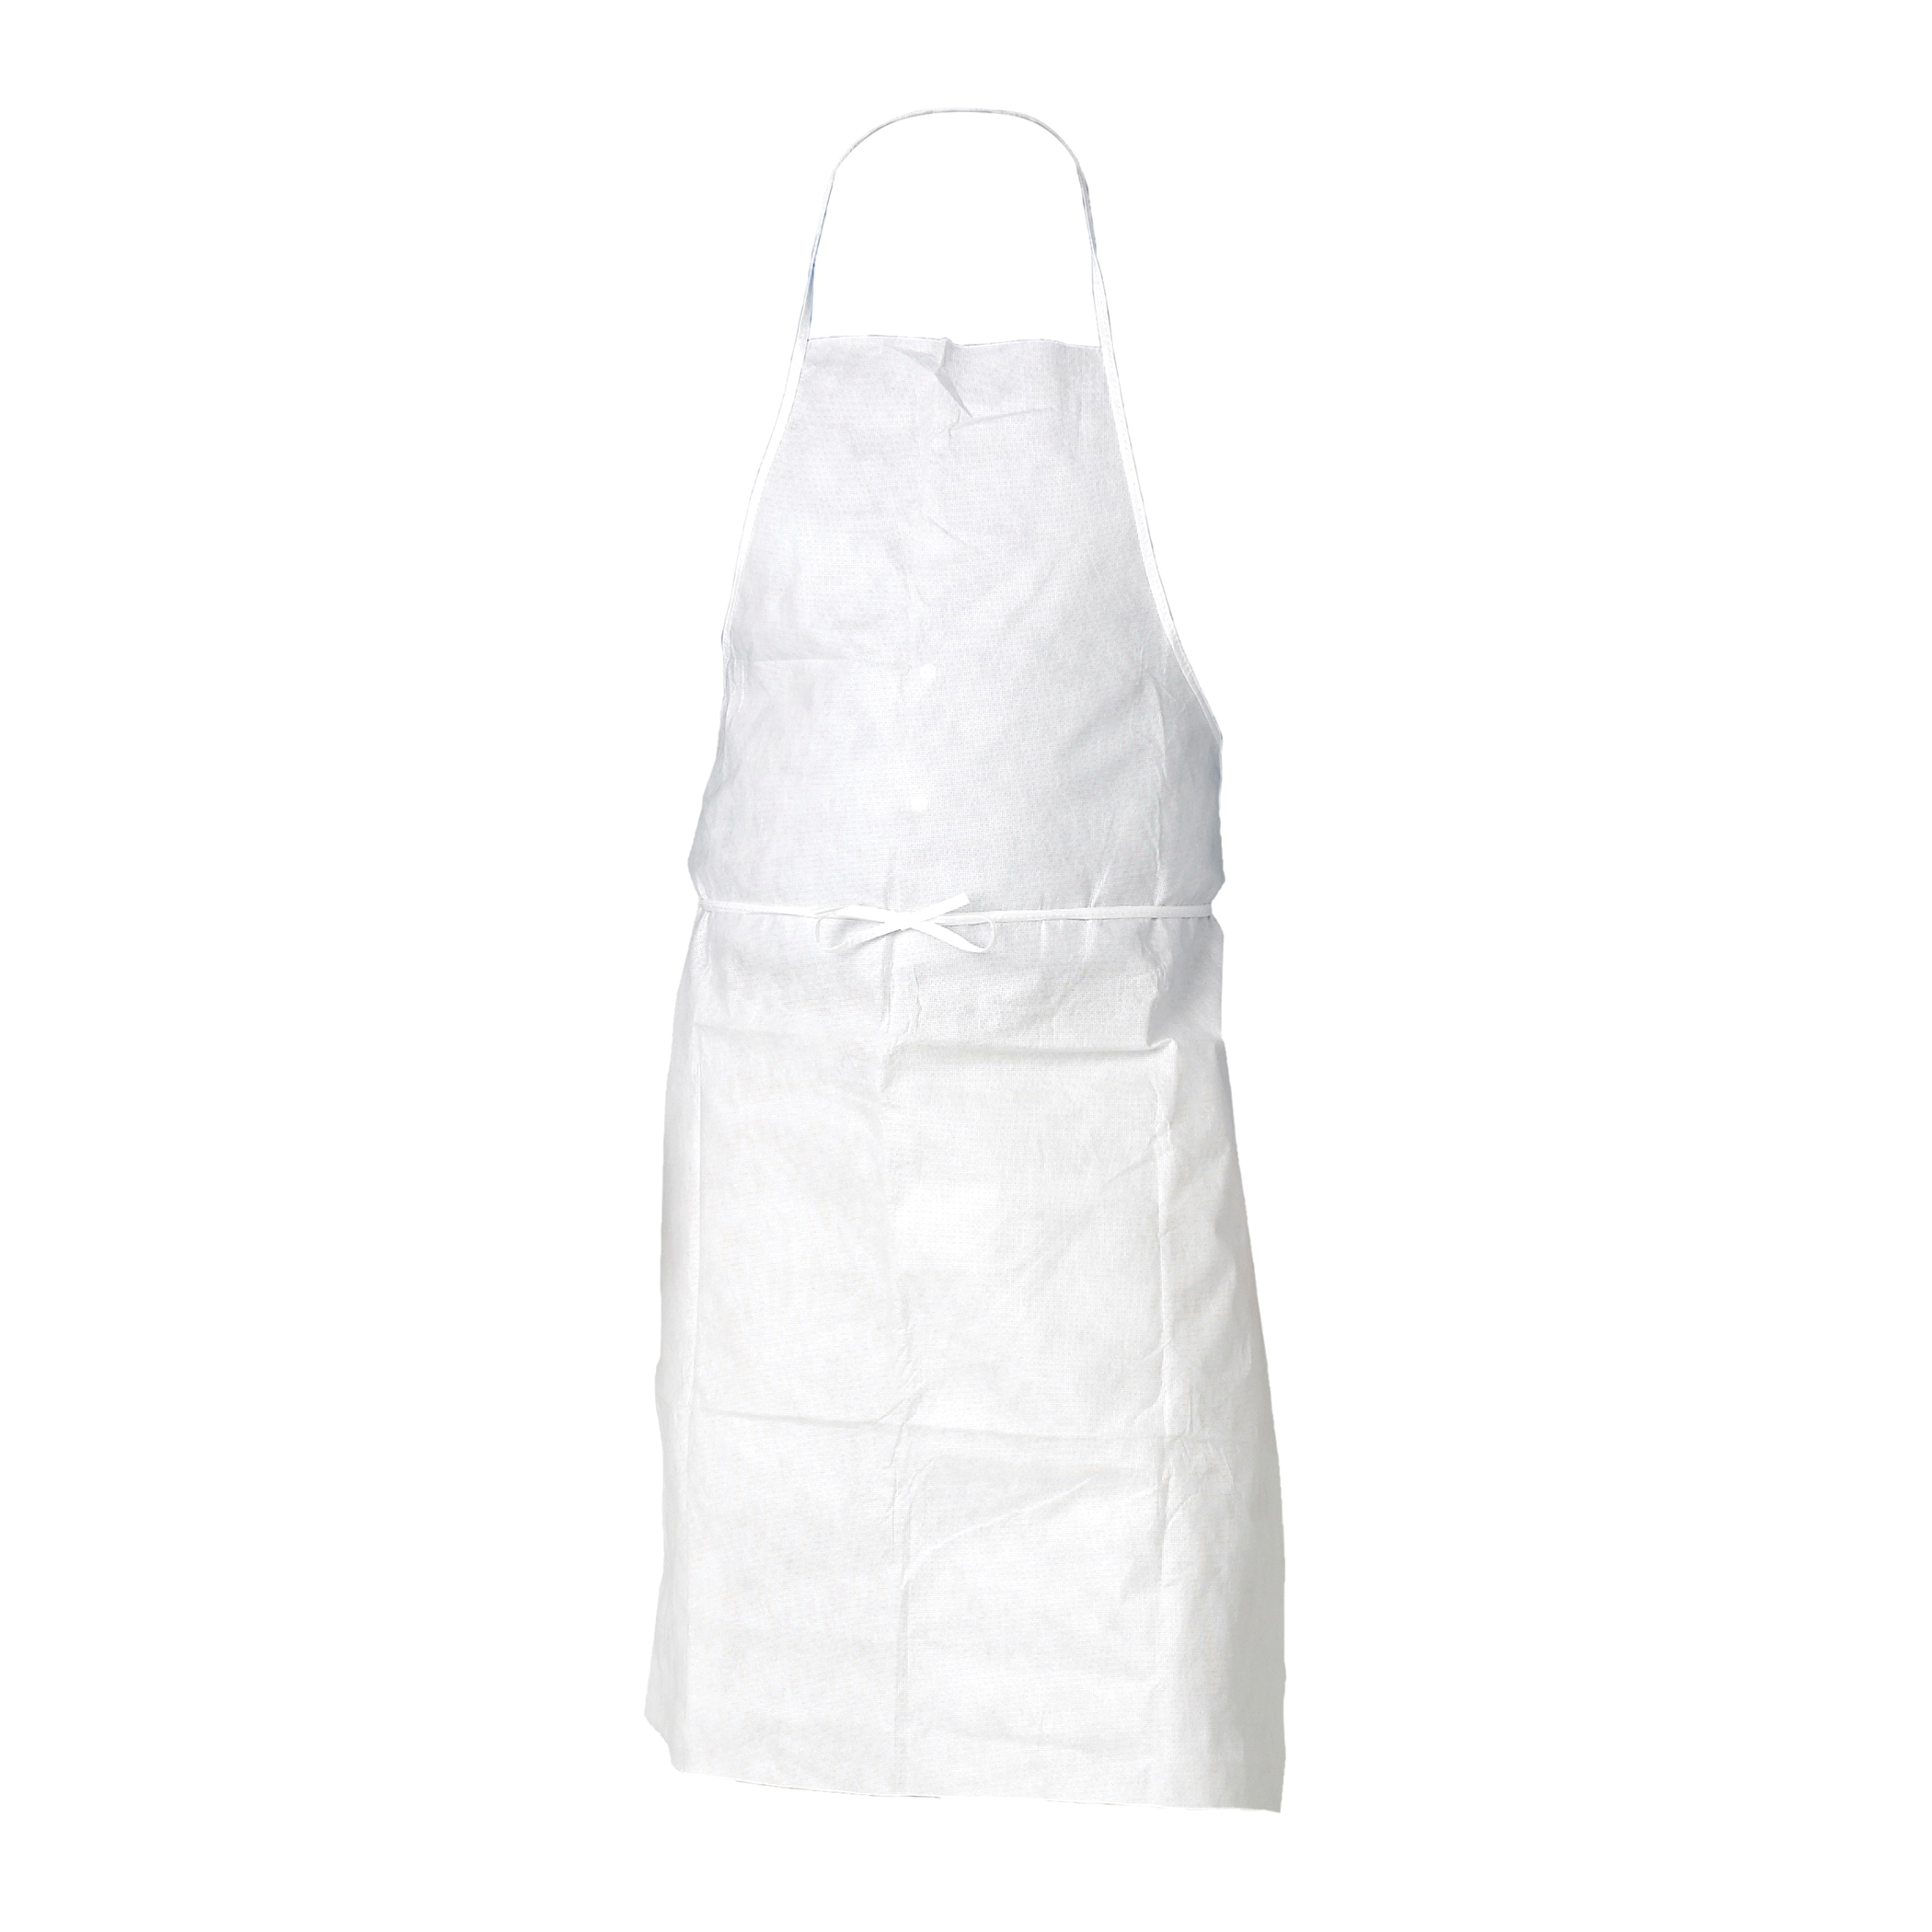 Irwin® 4031051 Nail Apron With 2 Pockets, Cotton